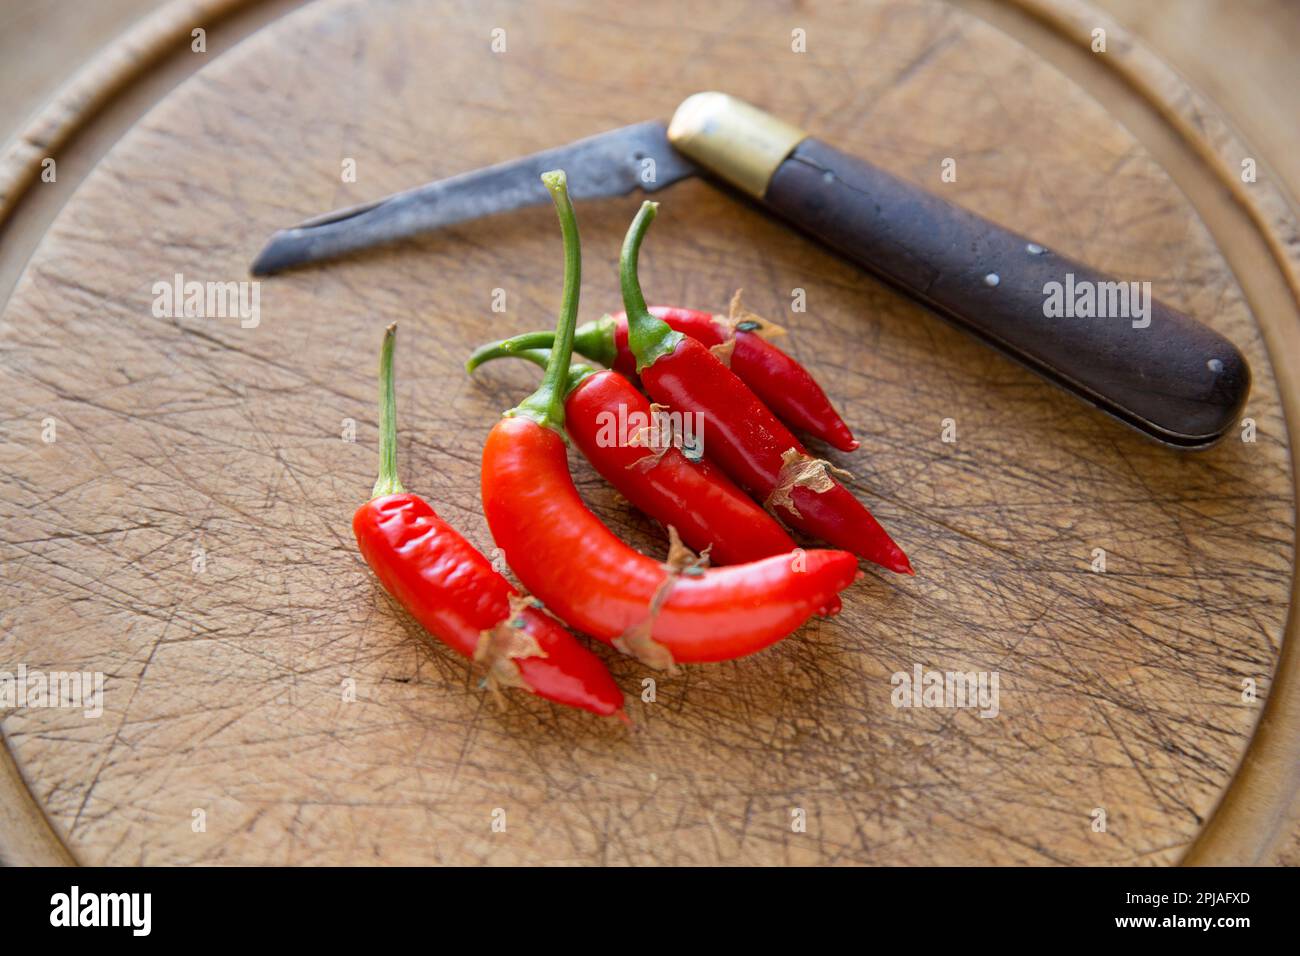 Home grown red chillies next to an old penknife resting on a wooden chopping board. England UK GB Stock Photo